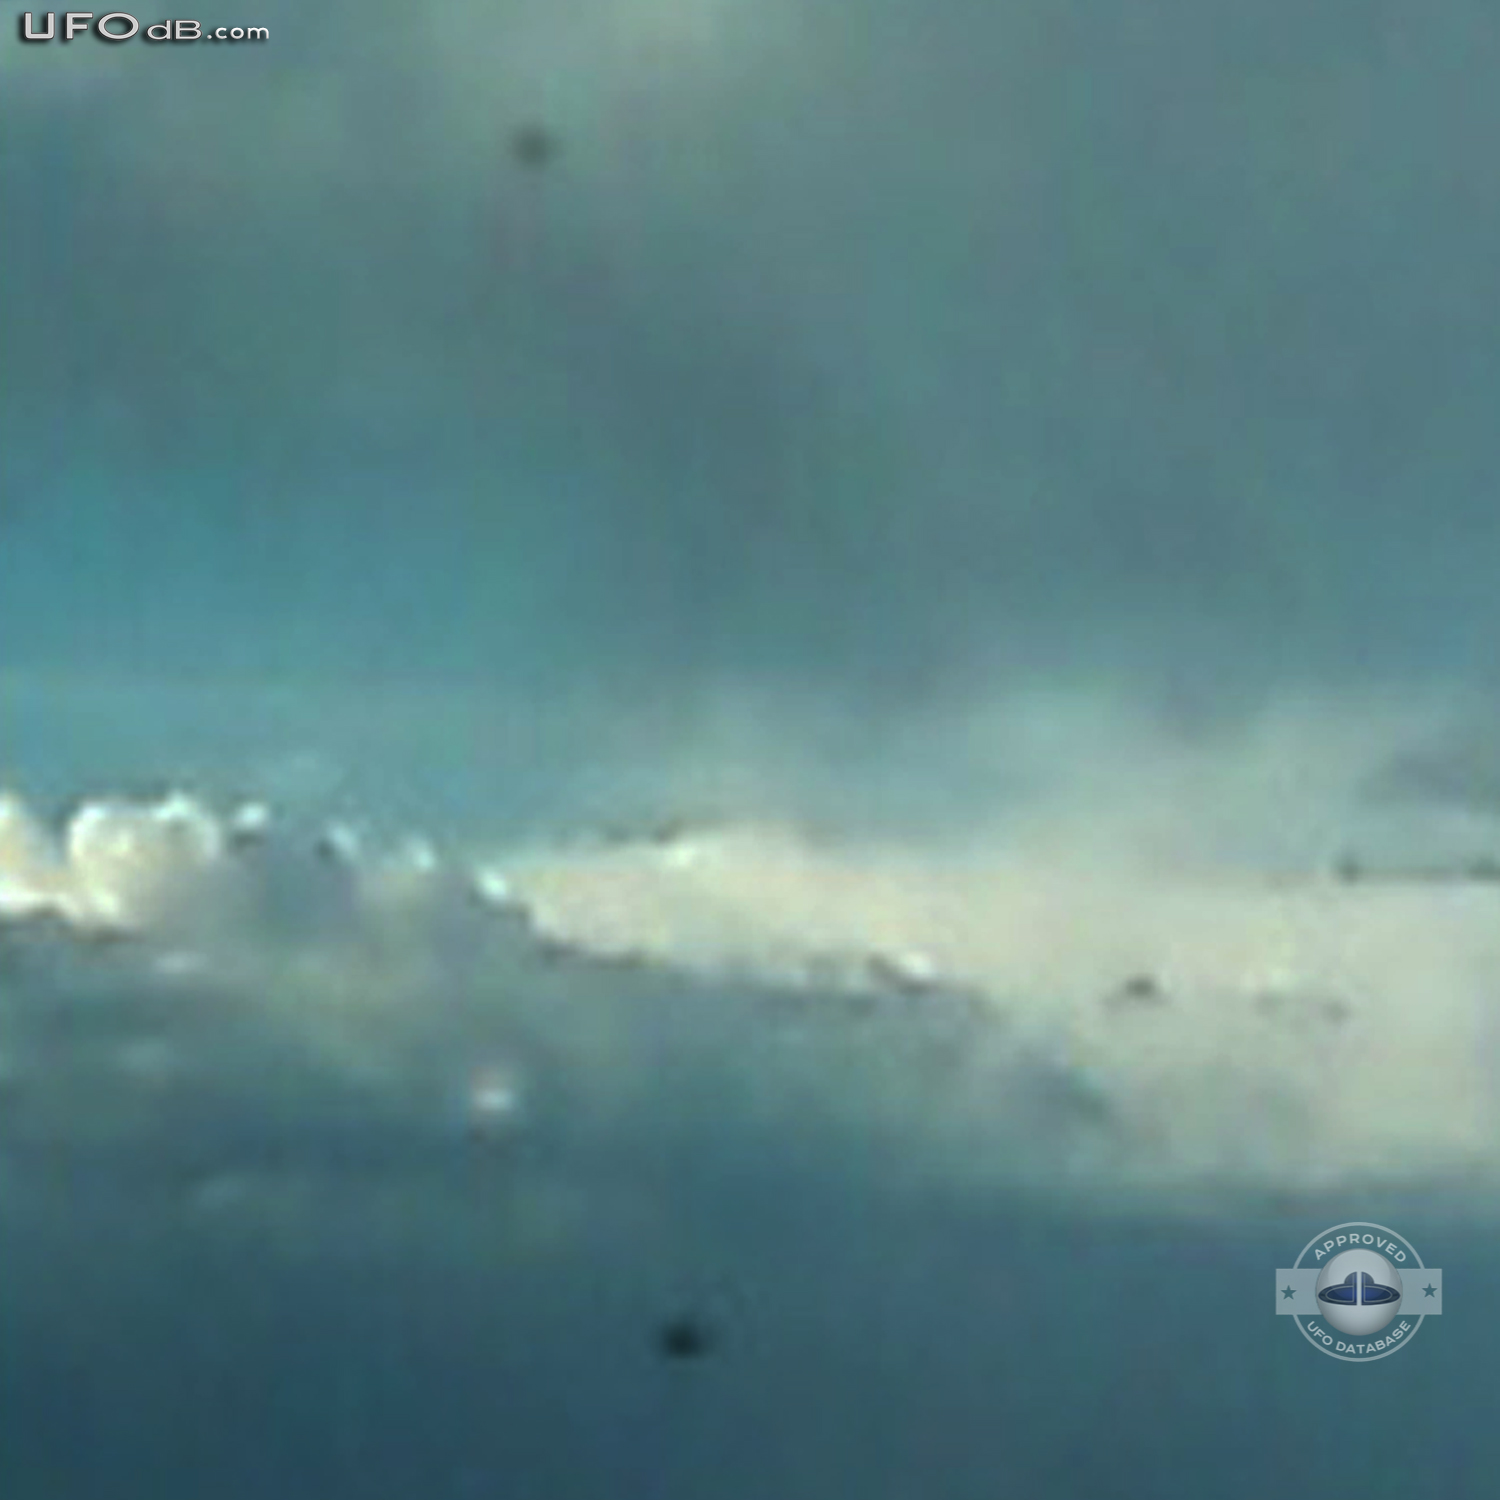 Group of UFOs hiding in the clouds in Cedar City, Utah | May 14 2011 UFO Picture #303-5